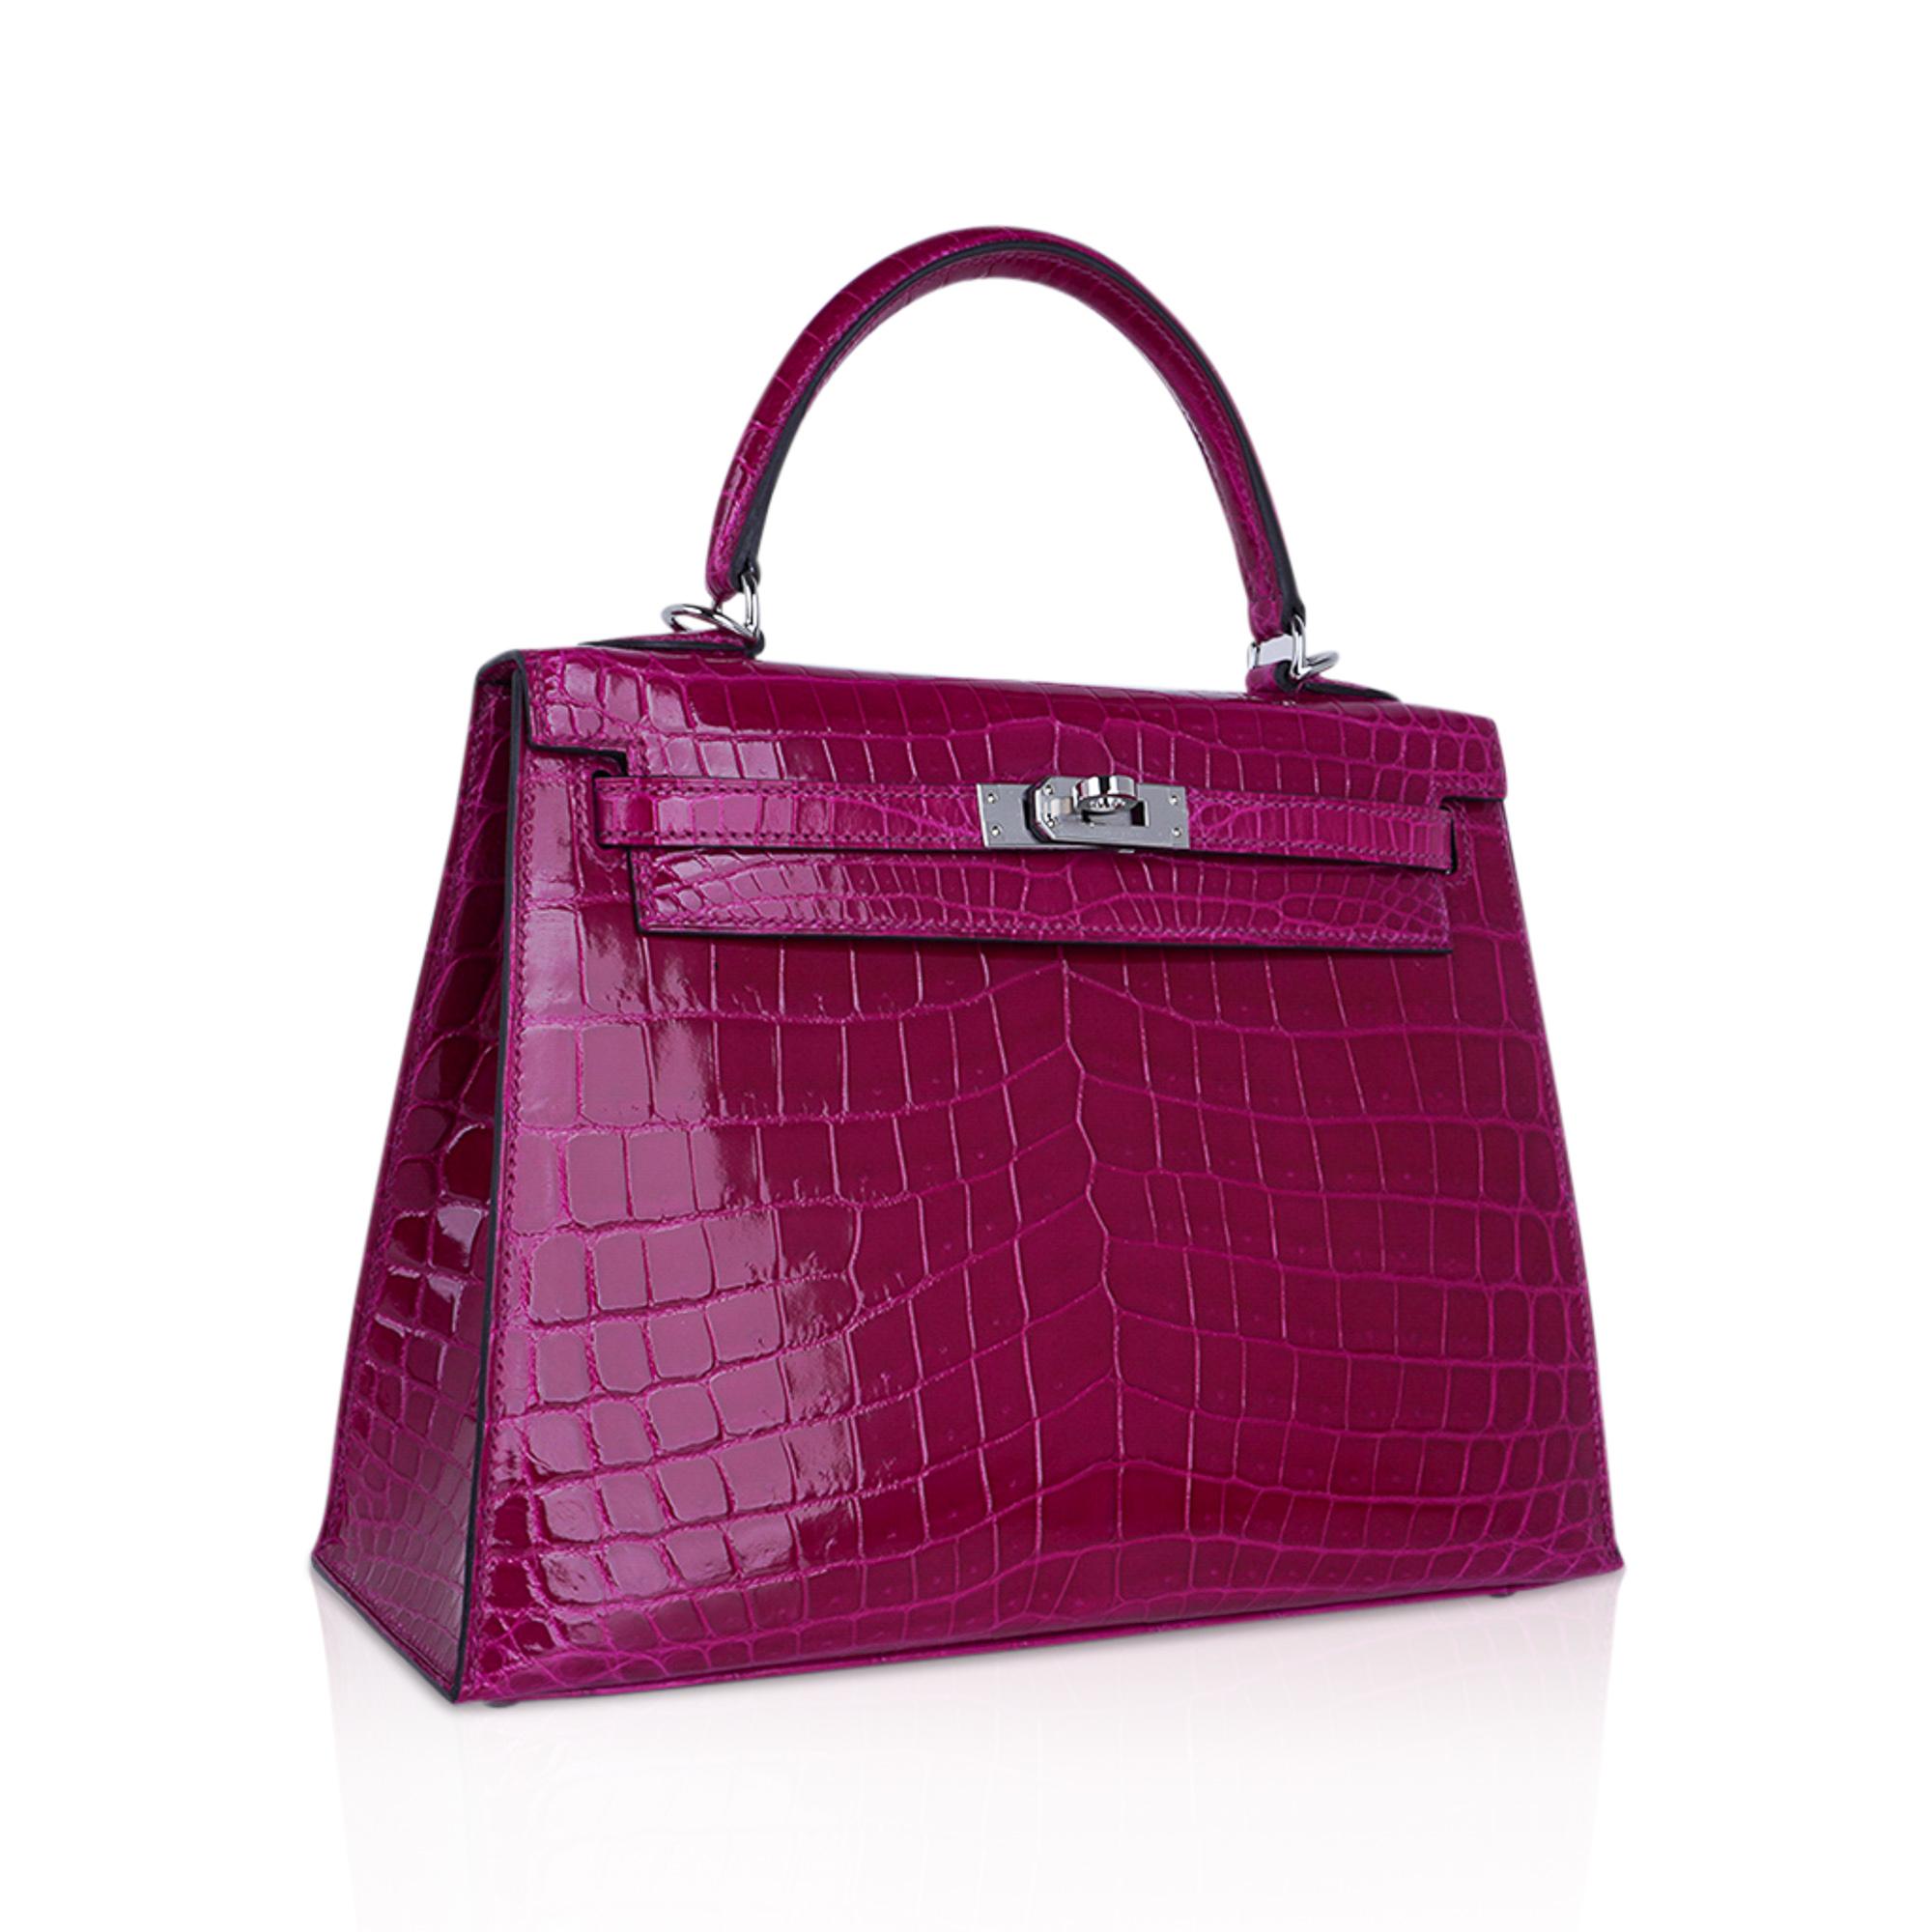 Mightychic offers an Hermes Kelly 25 Sellier bag featured in Rose Pourpre Crocodile.
Stunning Kelly bag in this richly saturated jewel toned with timeless Palladium hardware.
Perfect for year round wear, and easily moves from day to evening.
Comes